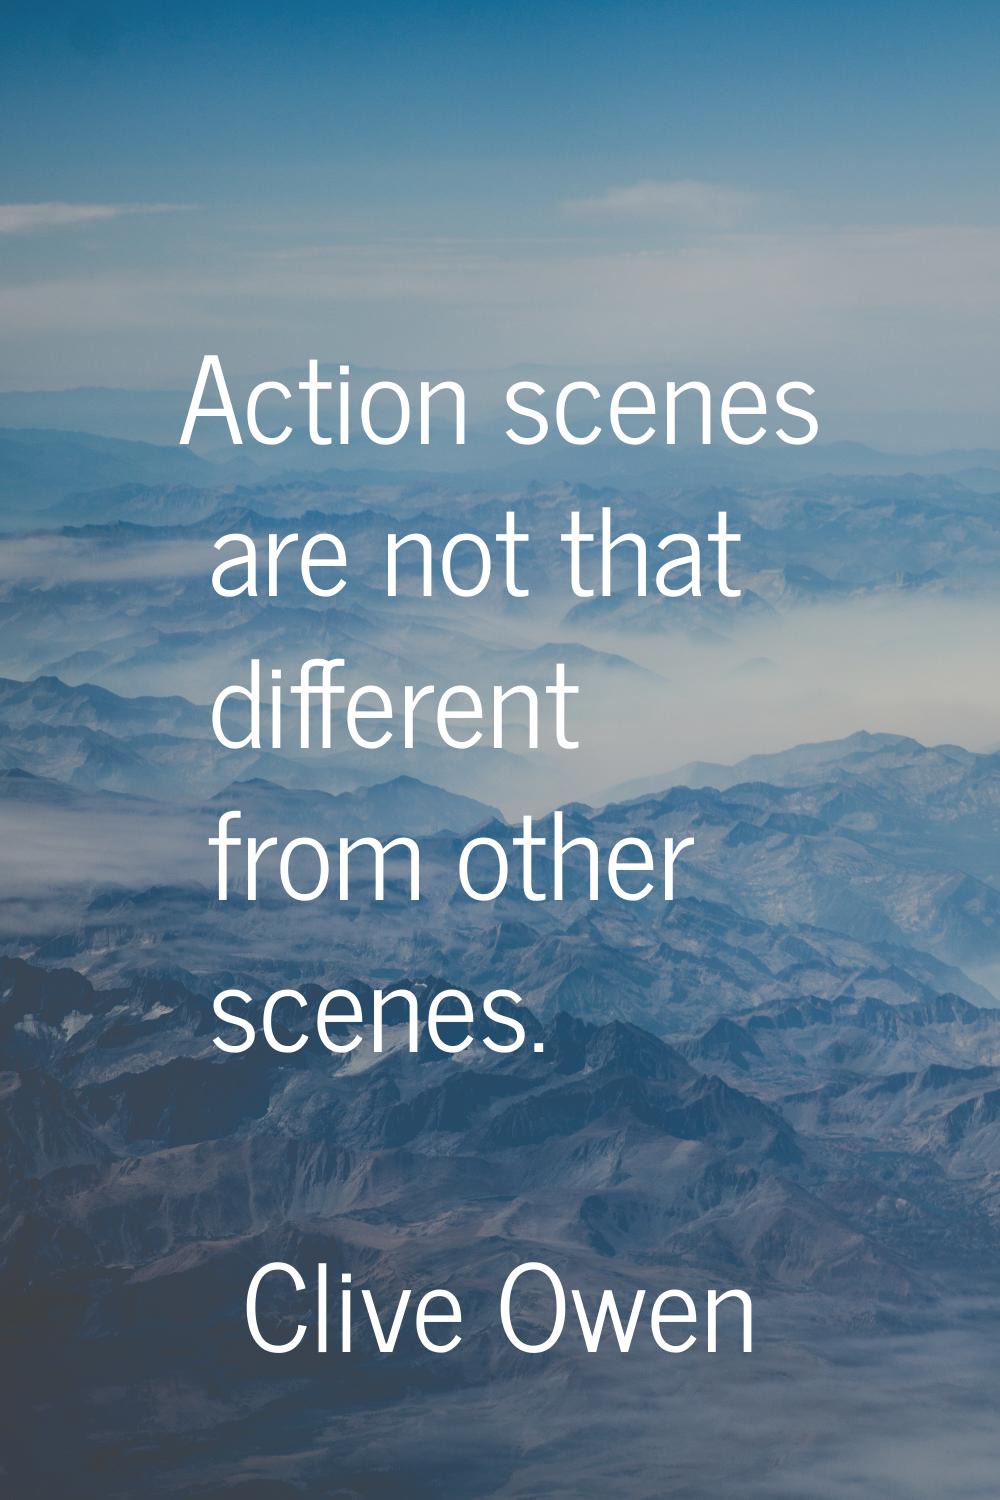 Action scenes are not that different from other scenes.